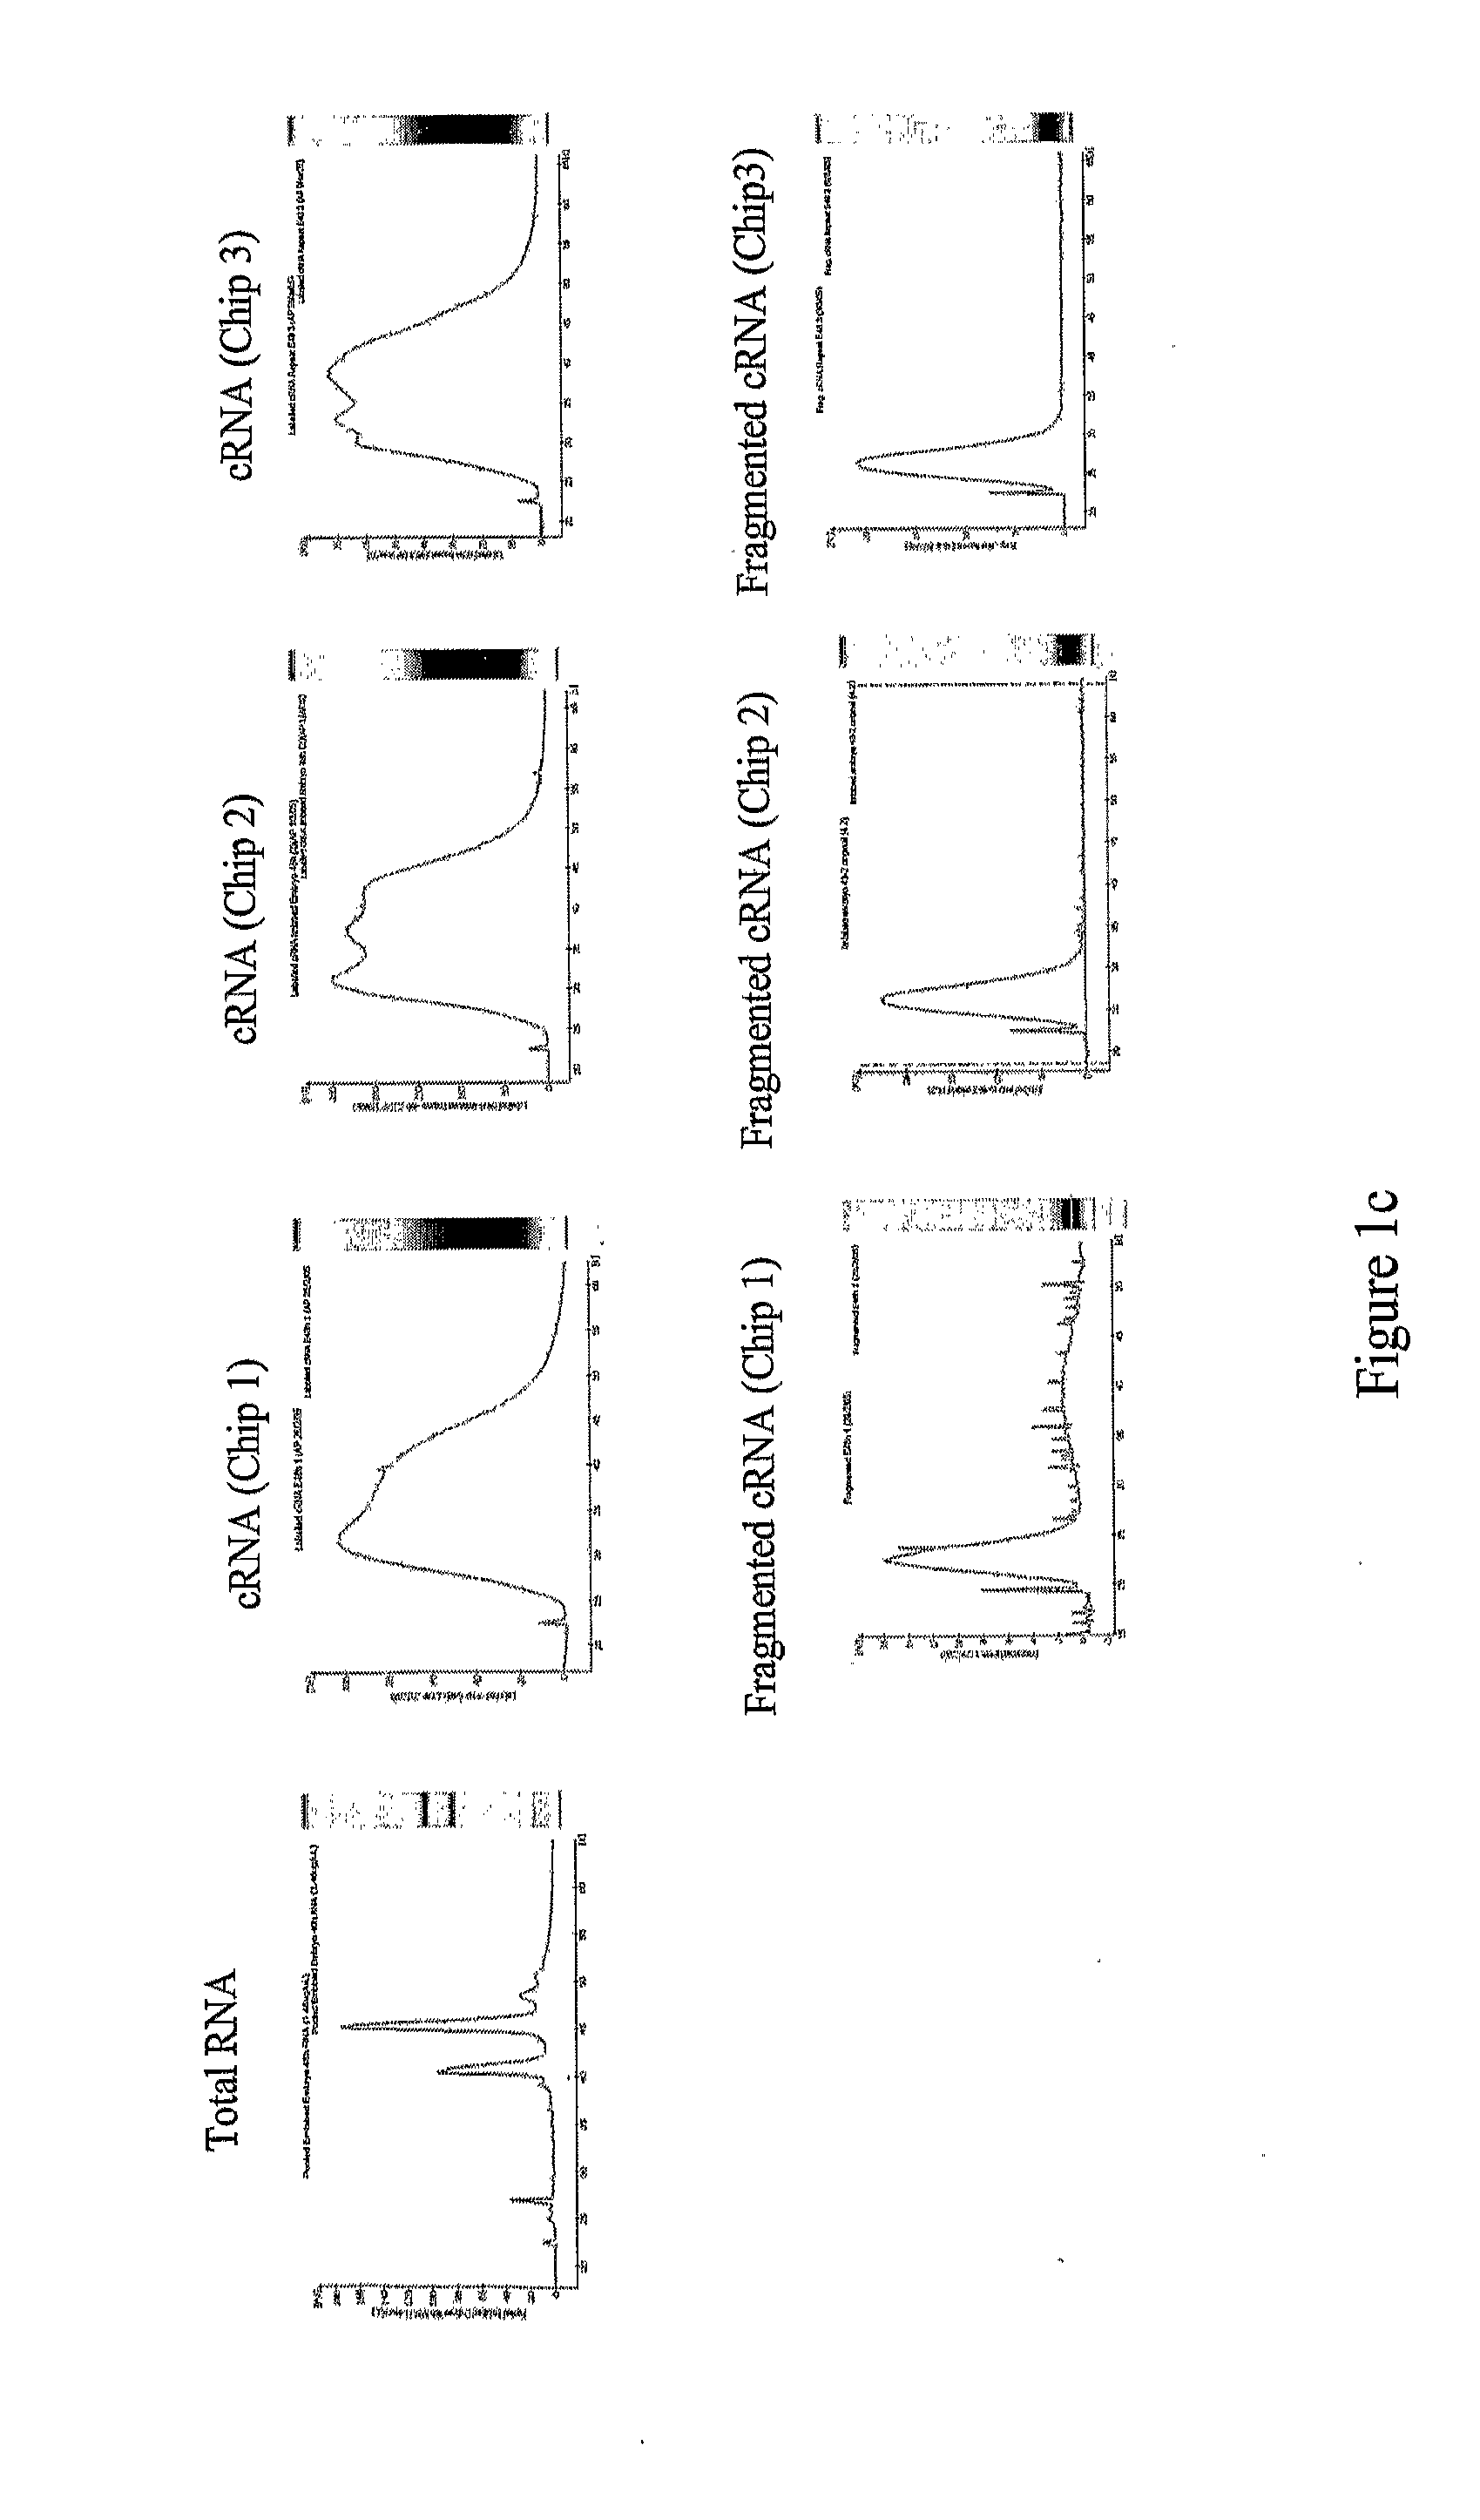 Plant Promoter Operable in Endosperm and Uses Thereof